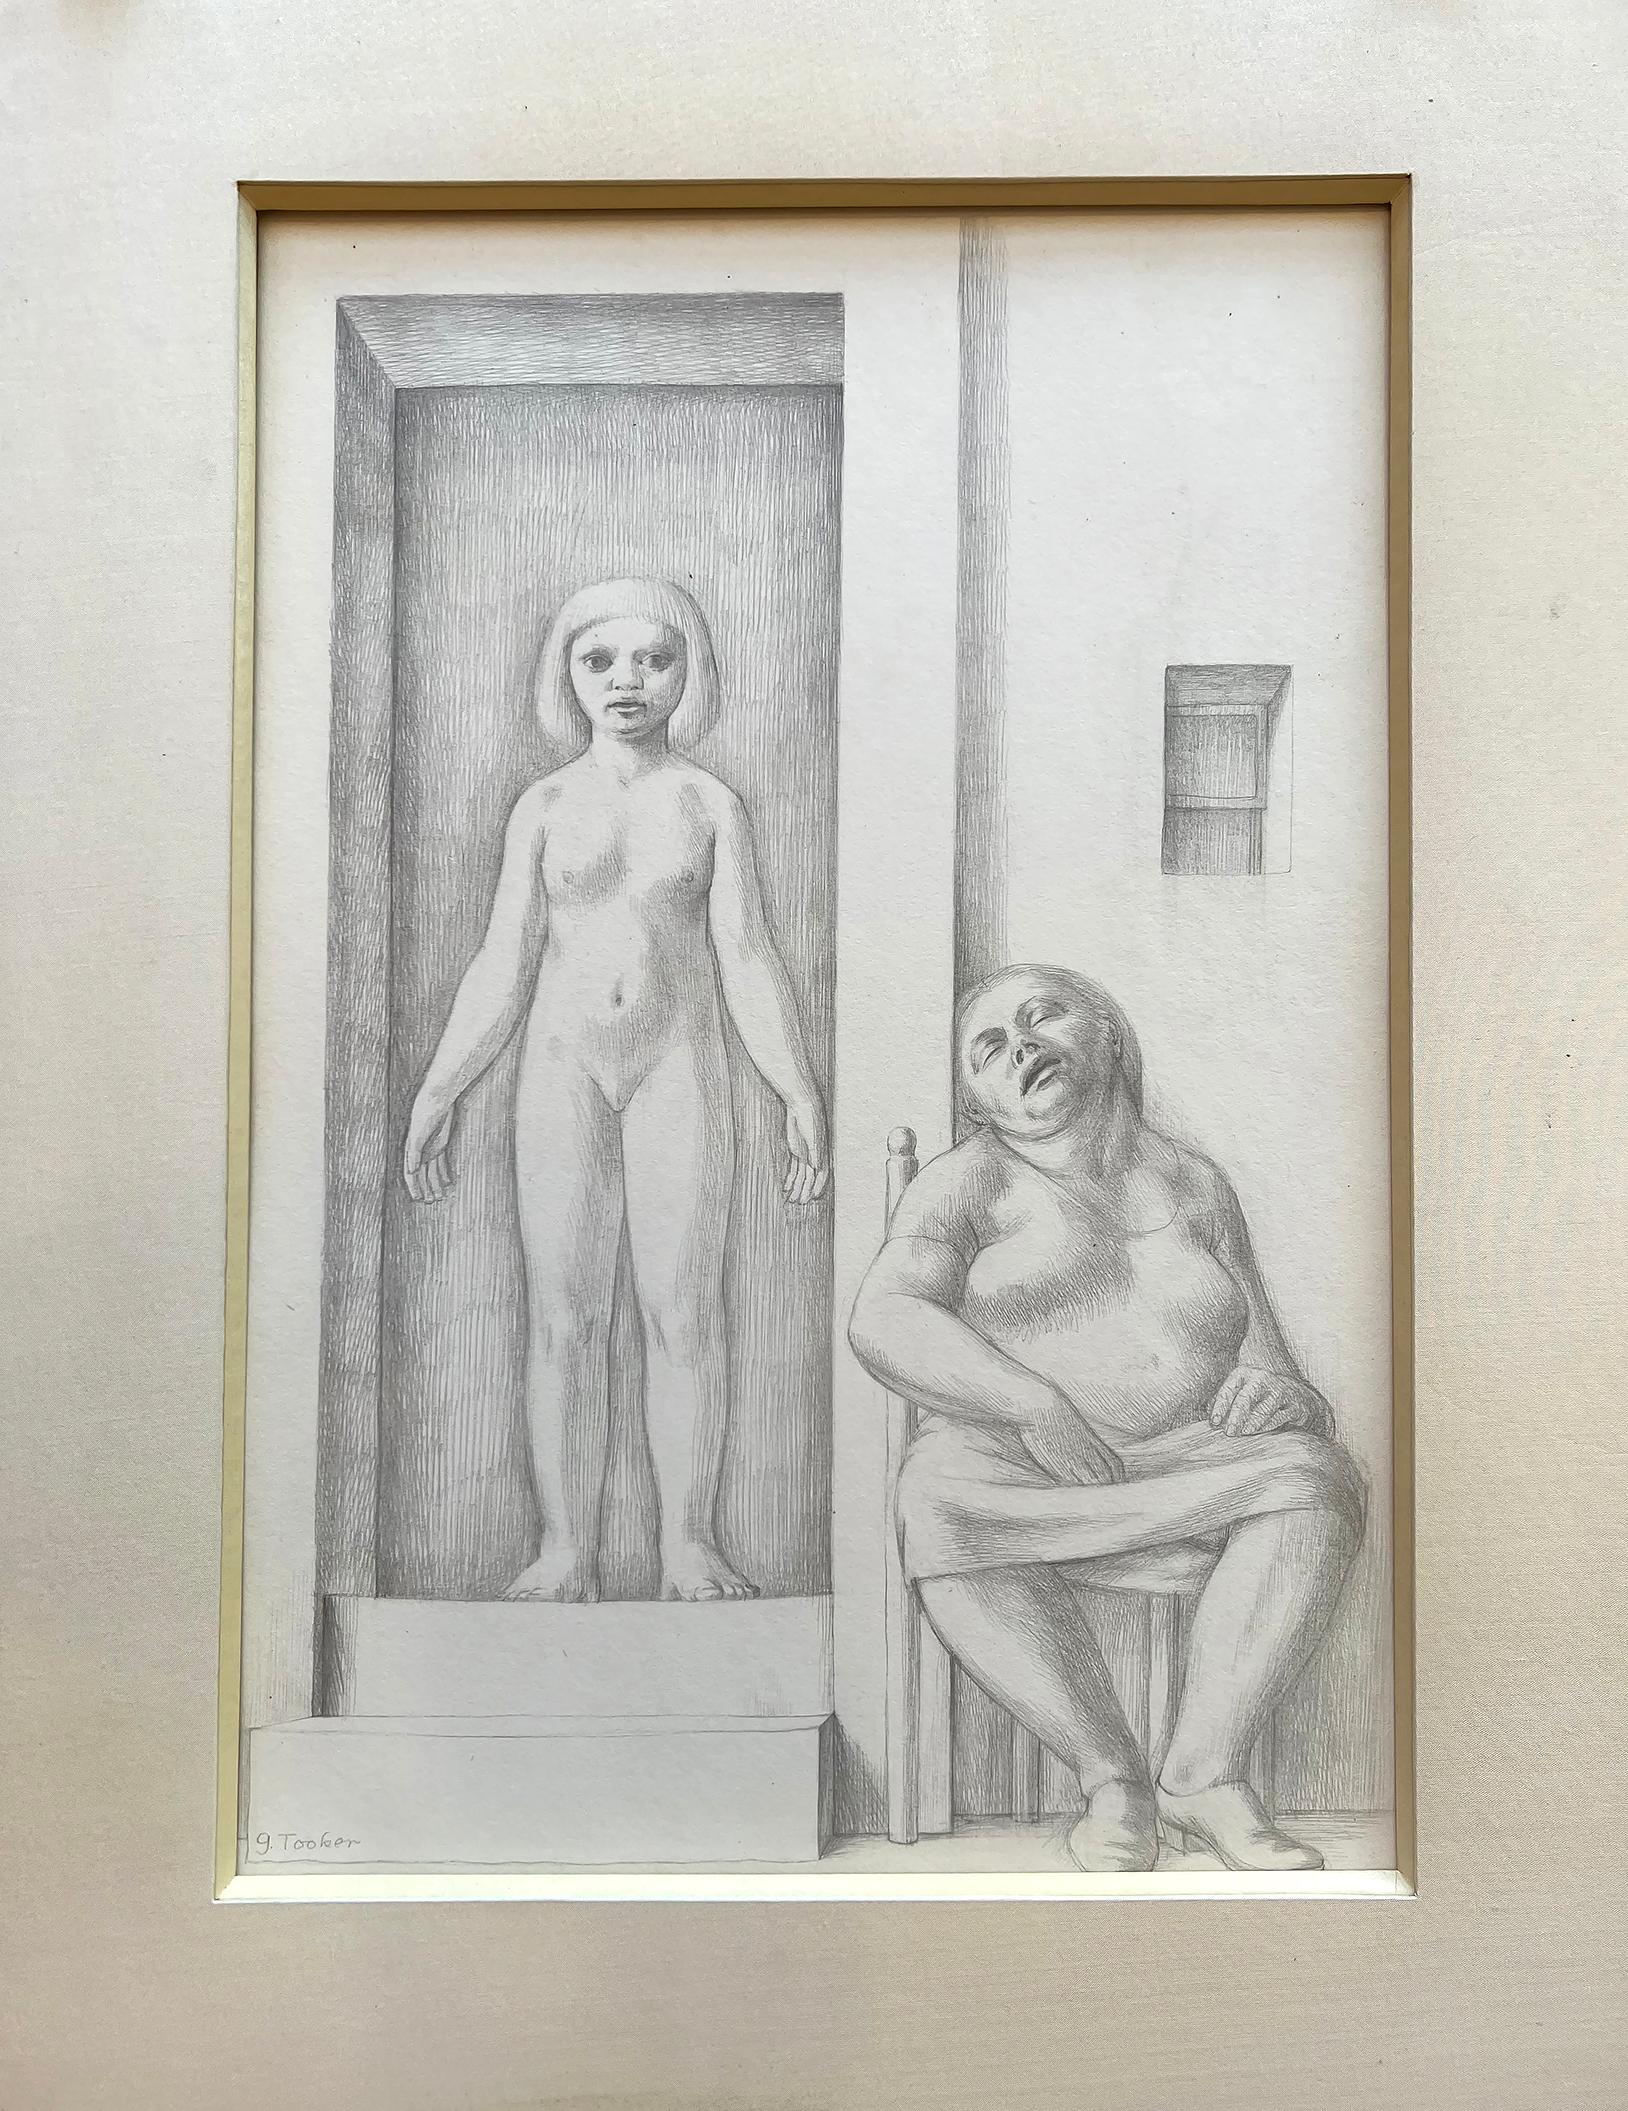 Two Women by George Tooker is a psychologically engaging portrait of contrasts. An untidy, older, overweight woman is seen slumped in a chair, asleep and lost in a dream. Her head tilts back, her skirt is pulled up, and her right hand nestles her